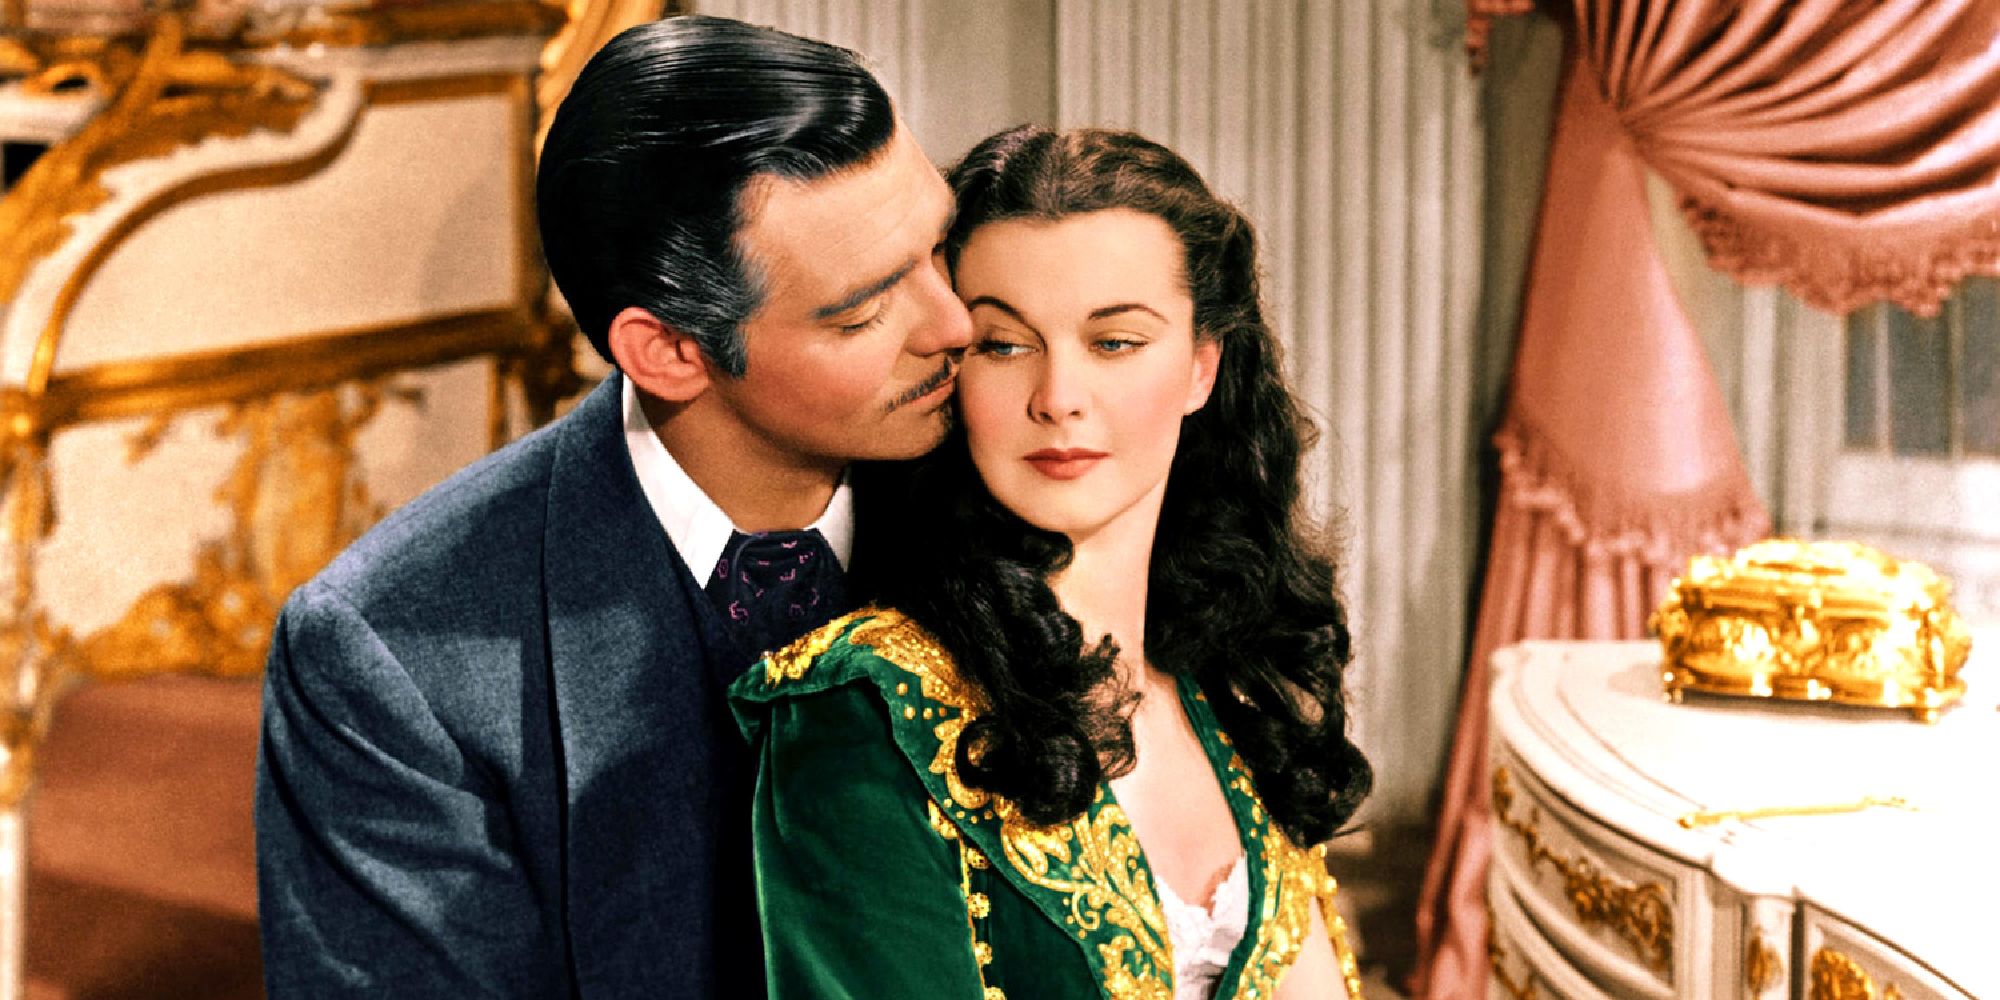 Rhett Butler and Scarlett O'Hara embracing in Gone With the Wind